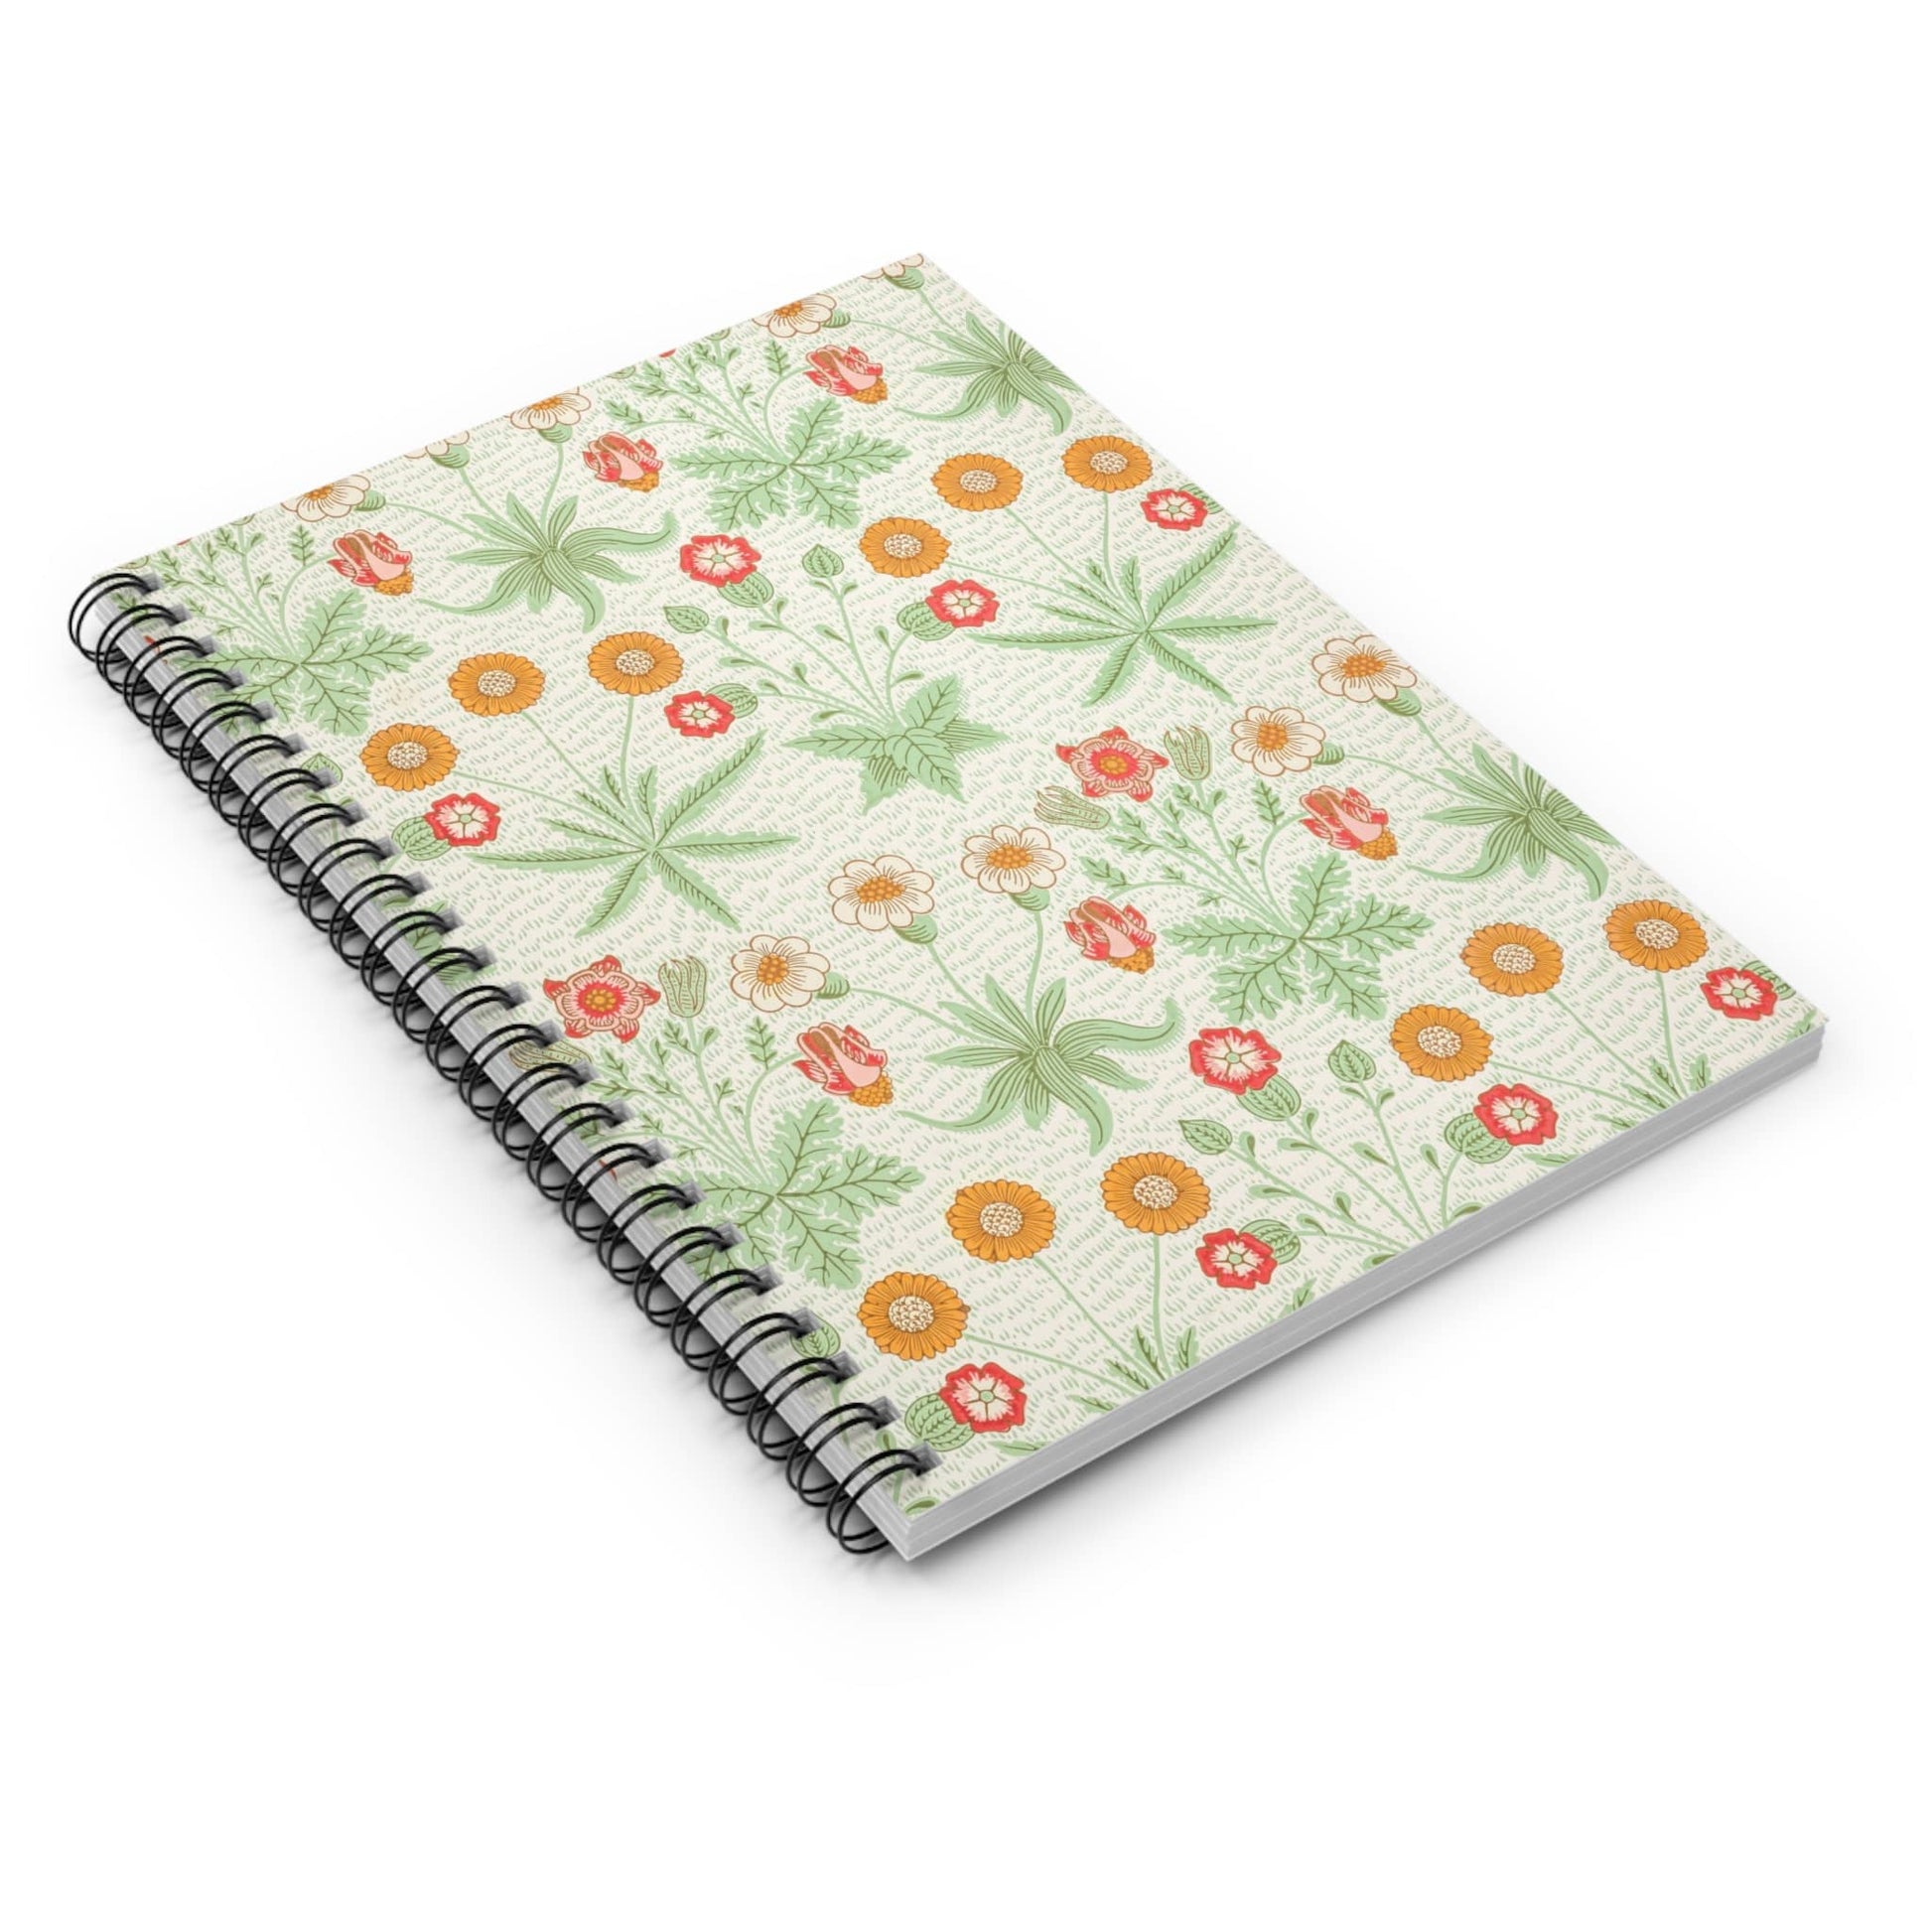 Minimalist Spring Flowers Spiral Notebook Laying Flat on White Surface